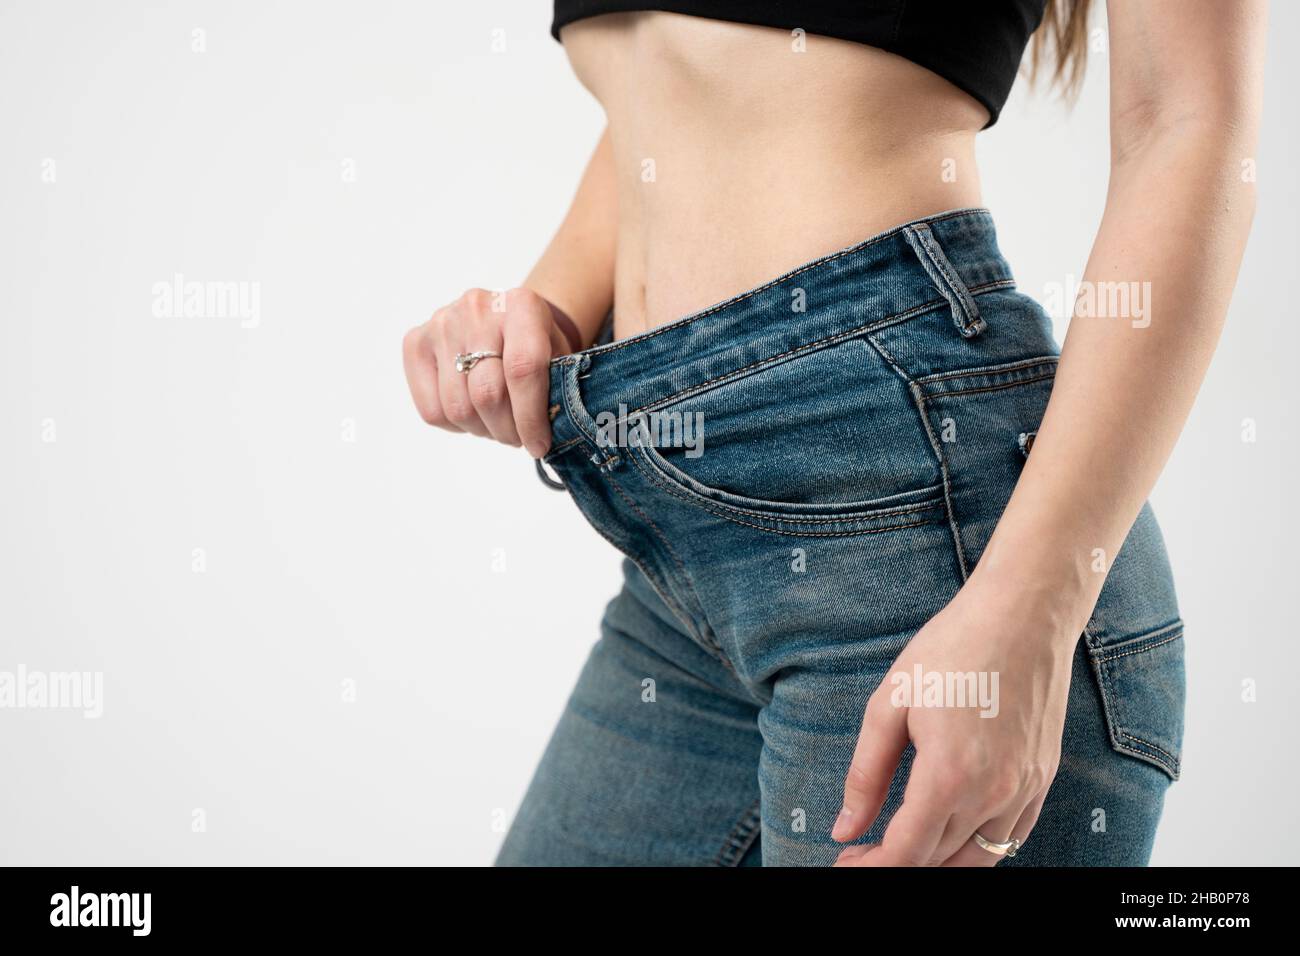 Cropped portrait of young female with flat belly and slim waist standing on  blank studio wall. Brunette woman wearing denim pants showing her beautiful  fit body. Lifestyle and people concept. Photos